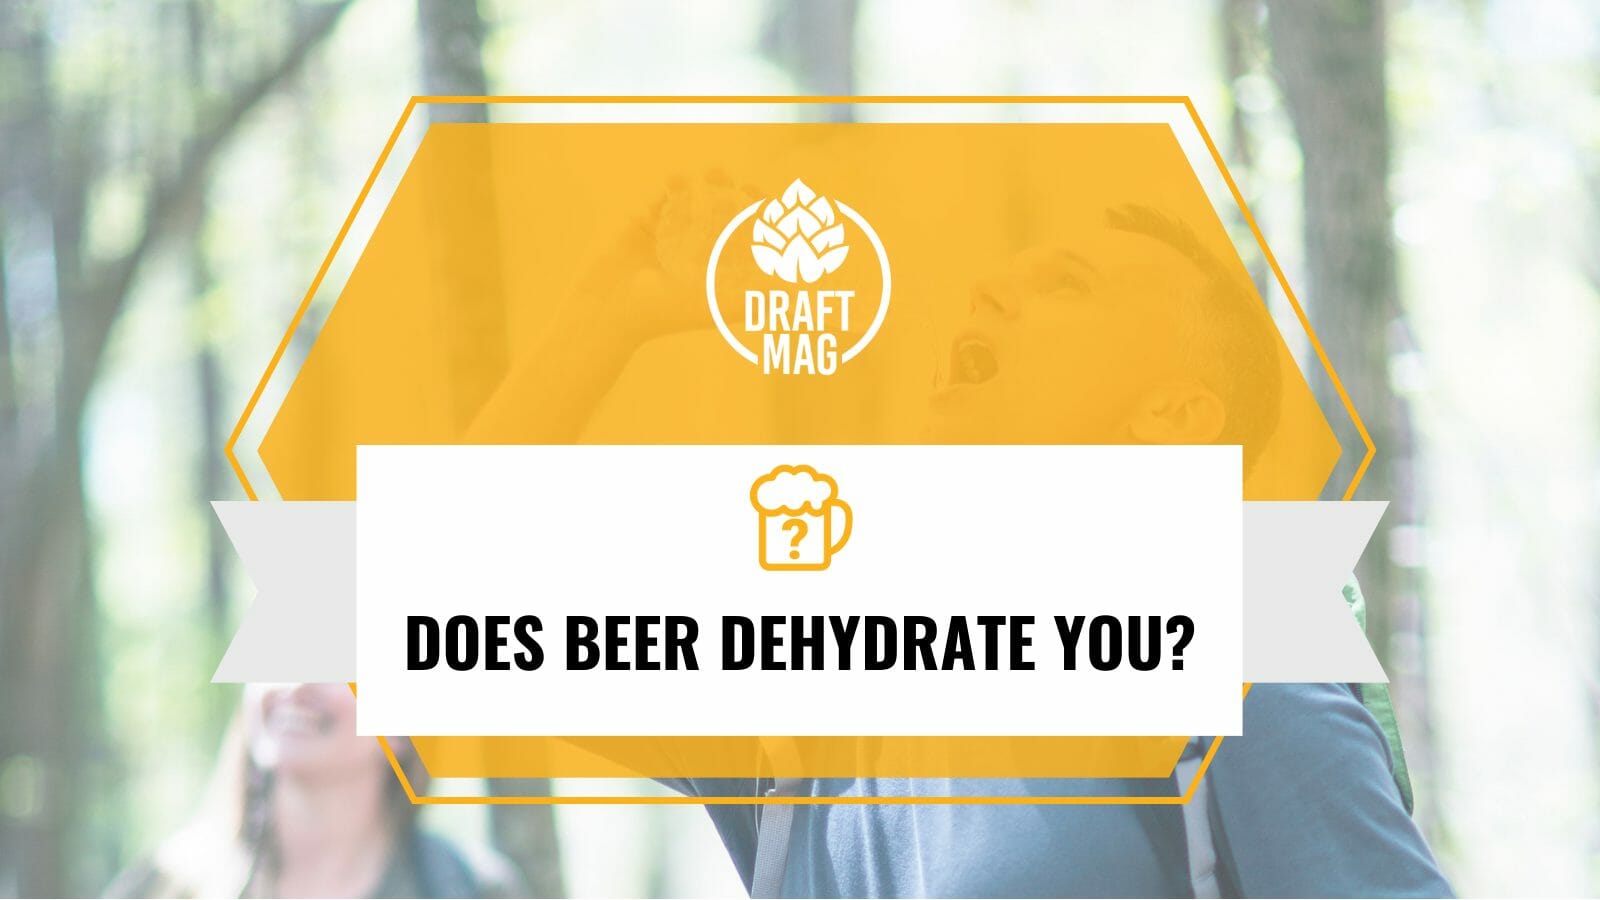 Does beer dehydrate you